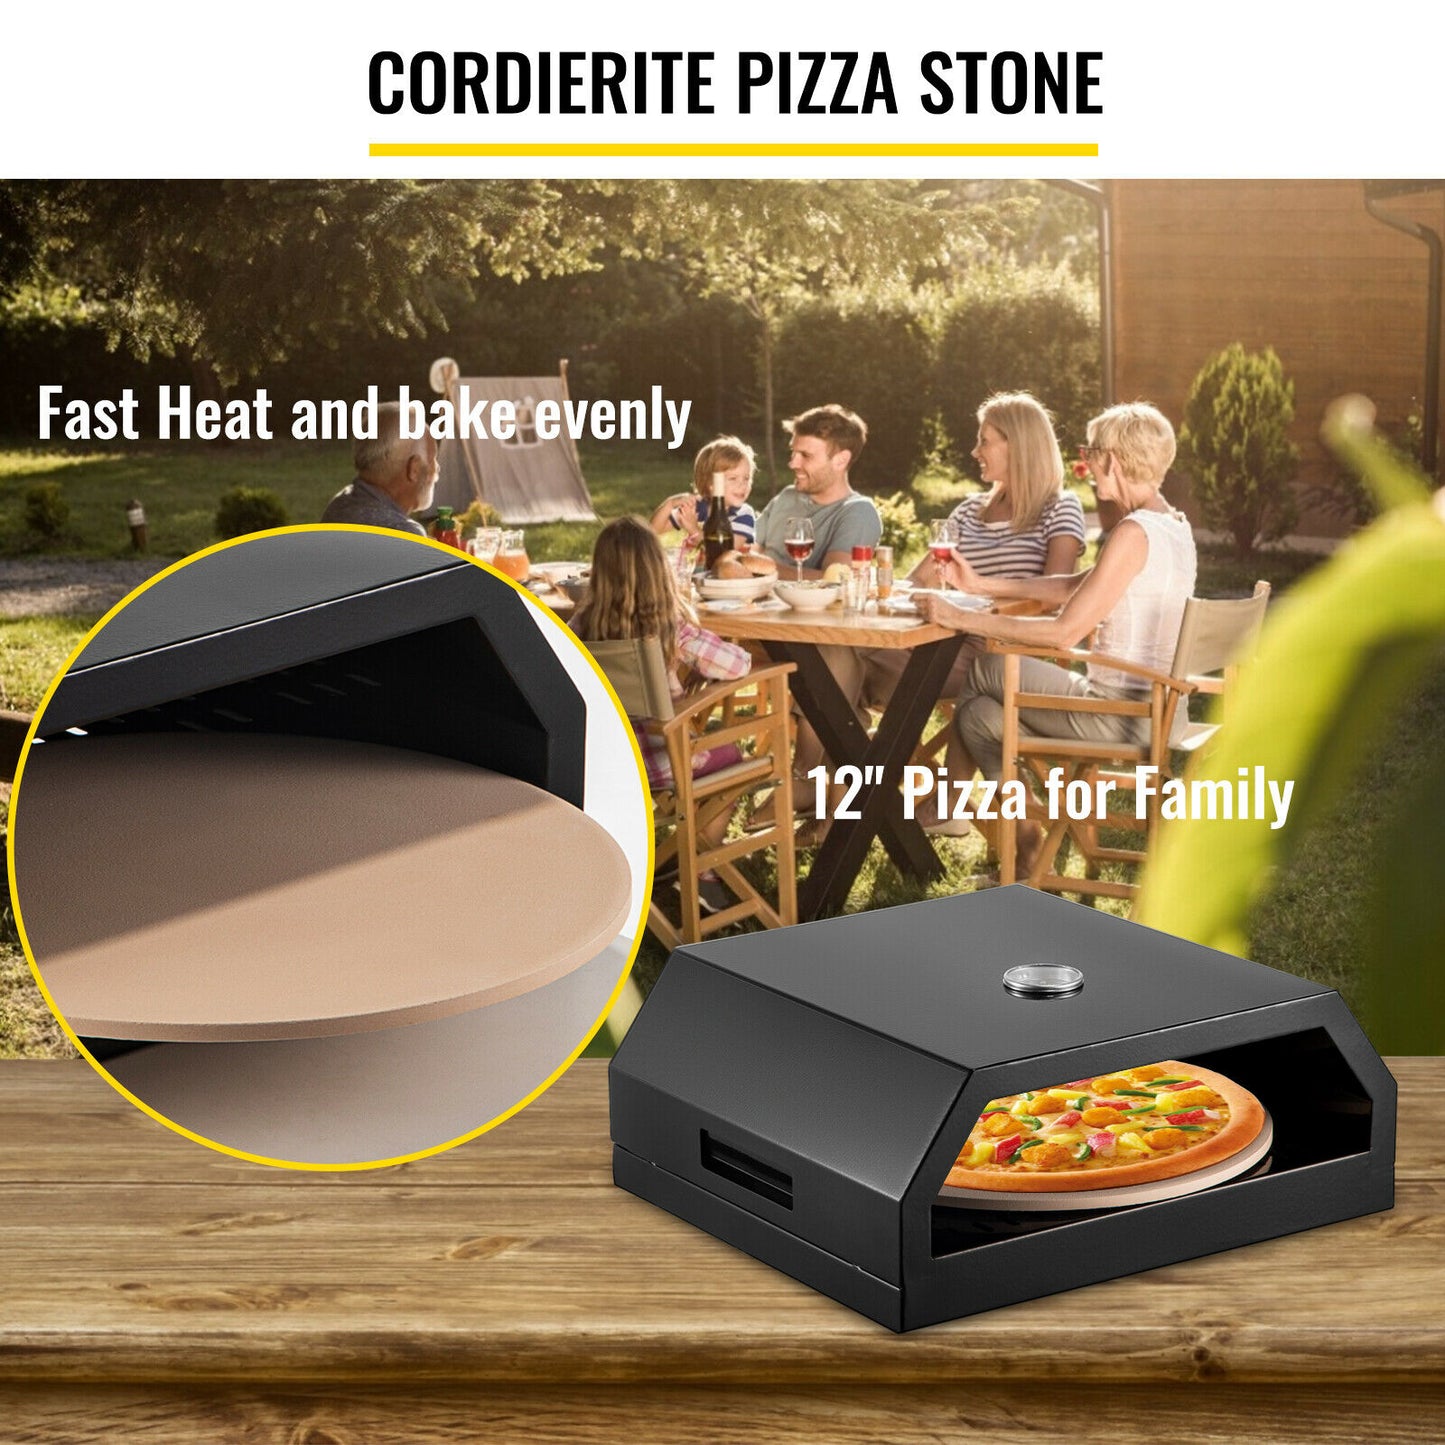 Pizza Oven Stainless Steel Temperature Range 75-450℉ for Beach Parties Camping